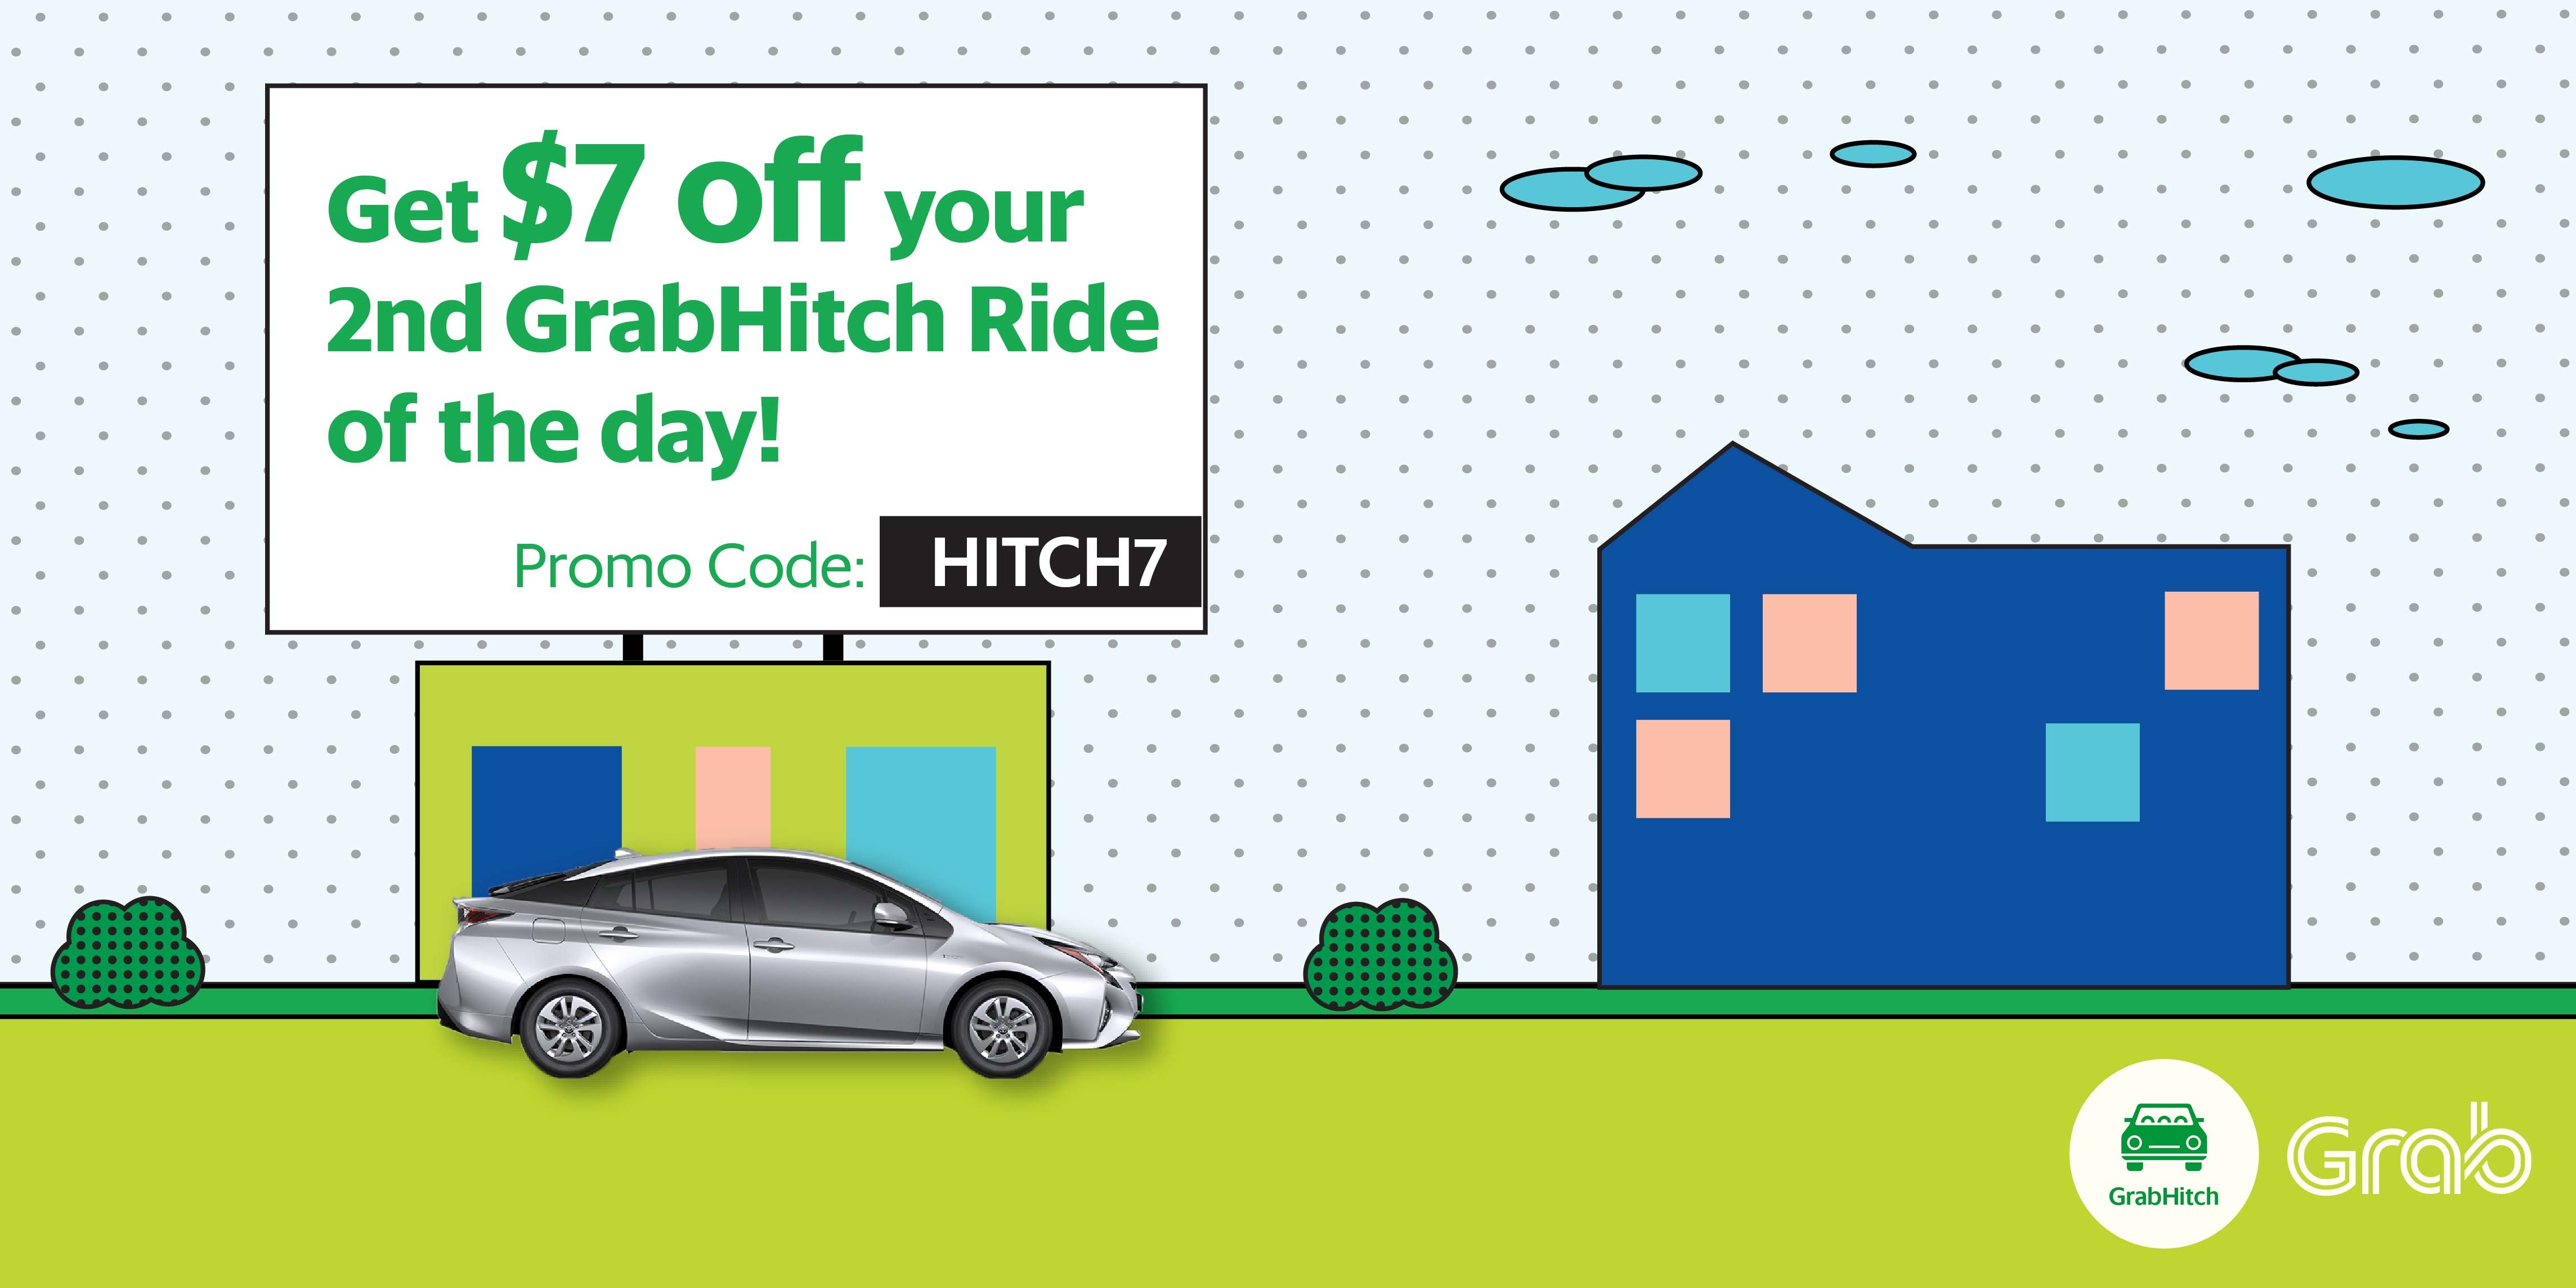 Grab Singapore $7 Off 2nd GrabHitch Ride HITCH7 Promo Code 8-12 May 2017